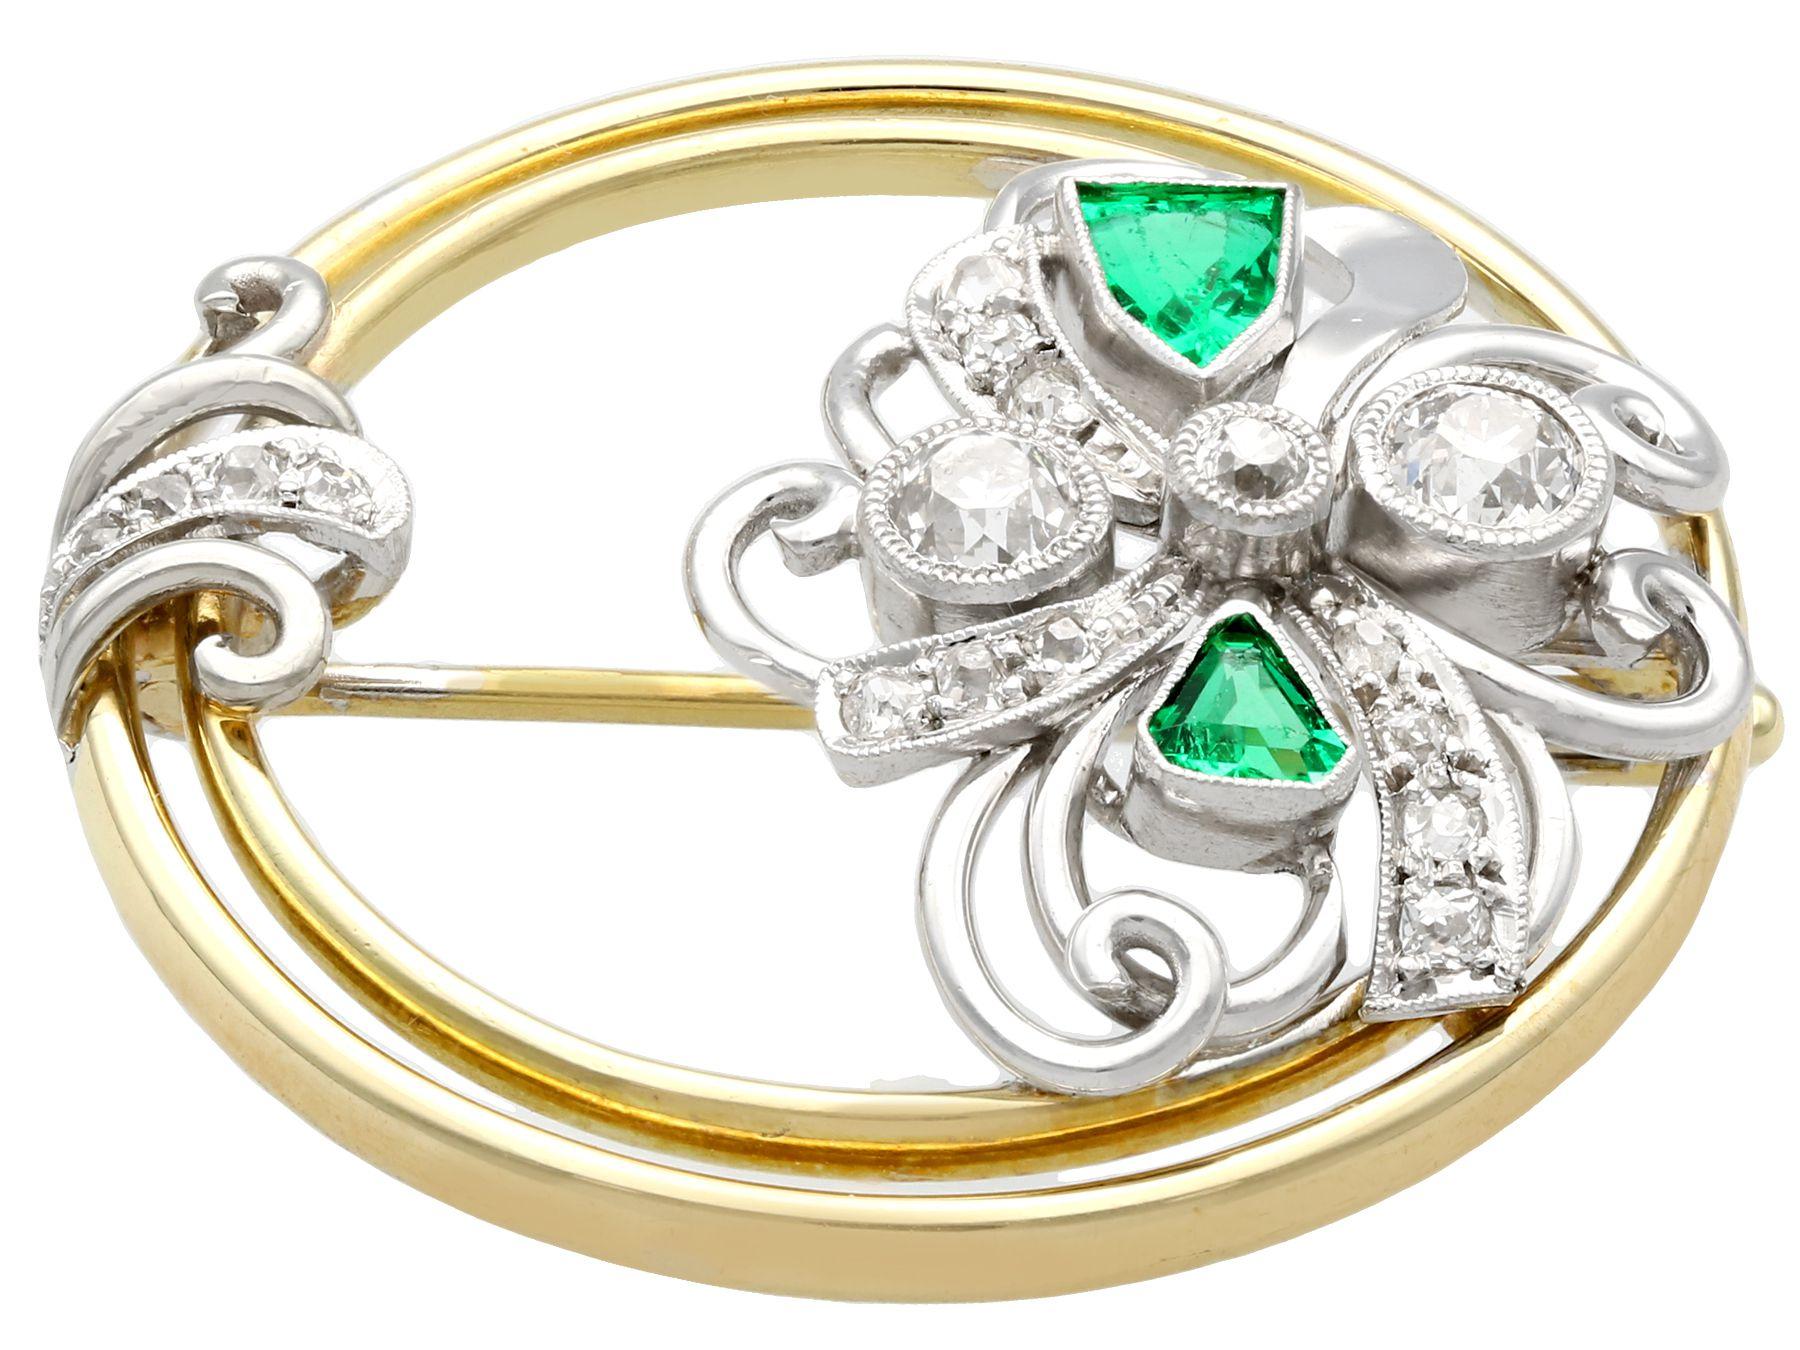 A stunning, fine and impressive antique 0.66 carat diamond and 0.59 carat emerald, 14 karat yellow gold and 14k white gold wreath brooch in the Art Deco style; part of our diverse antique jewelry and estate jewelry collections

This stunning antique